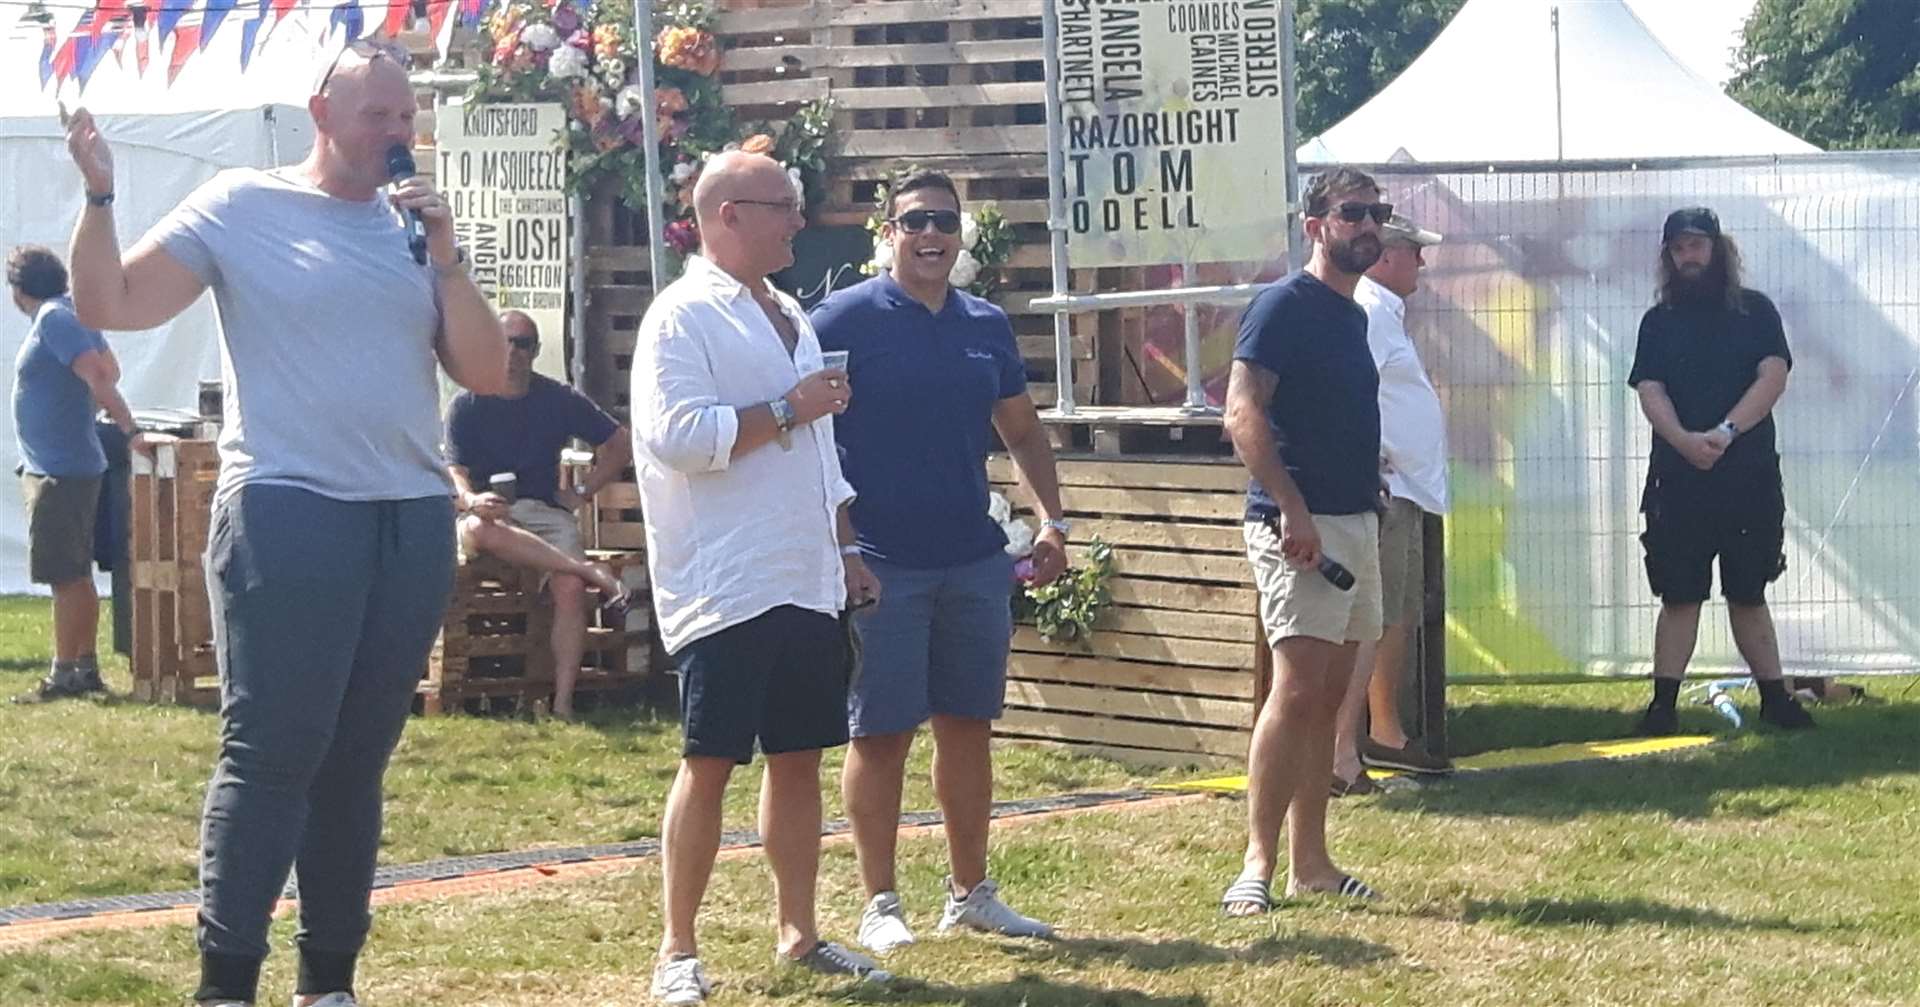 Tom Kerridge, left, gets things going, joined by Greg Wallace, Paul Ainsworth and Mark Sargeant